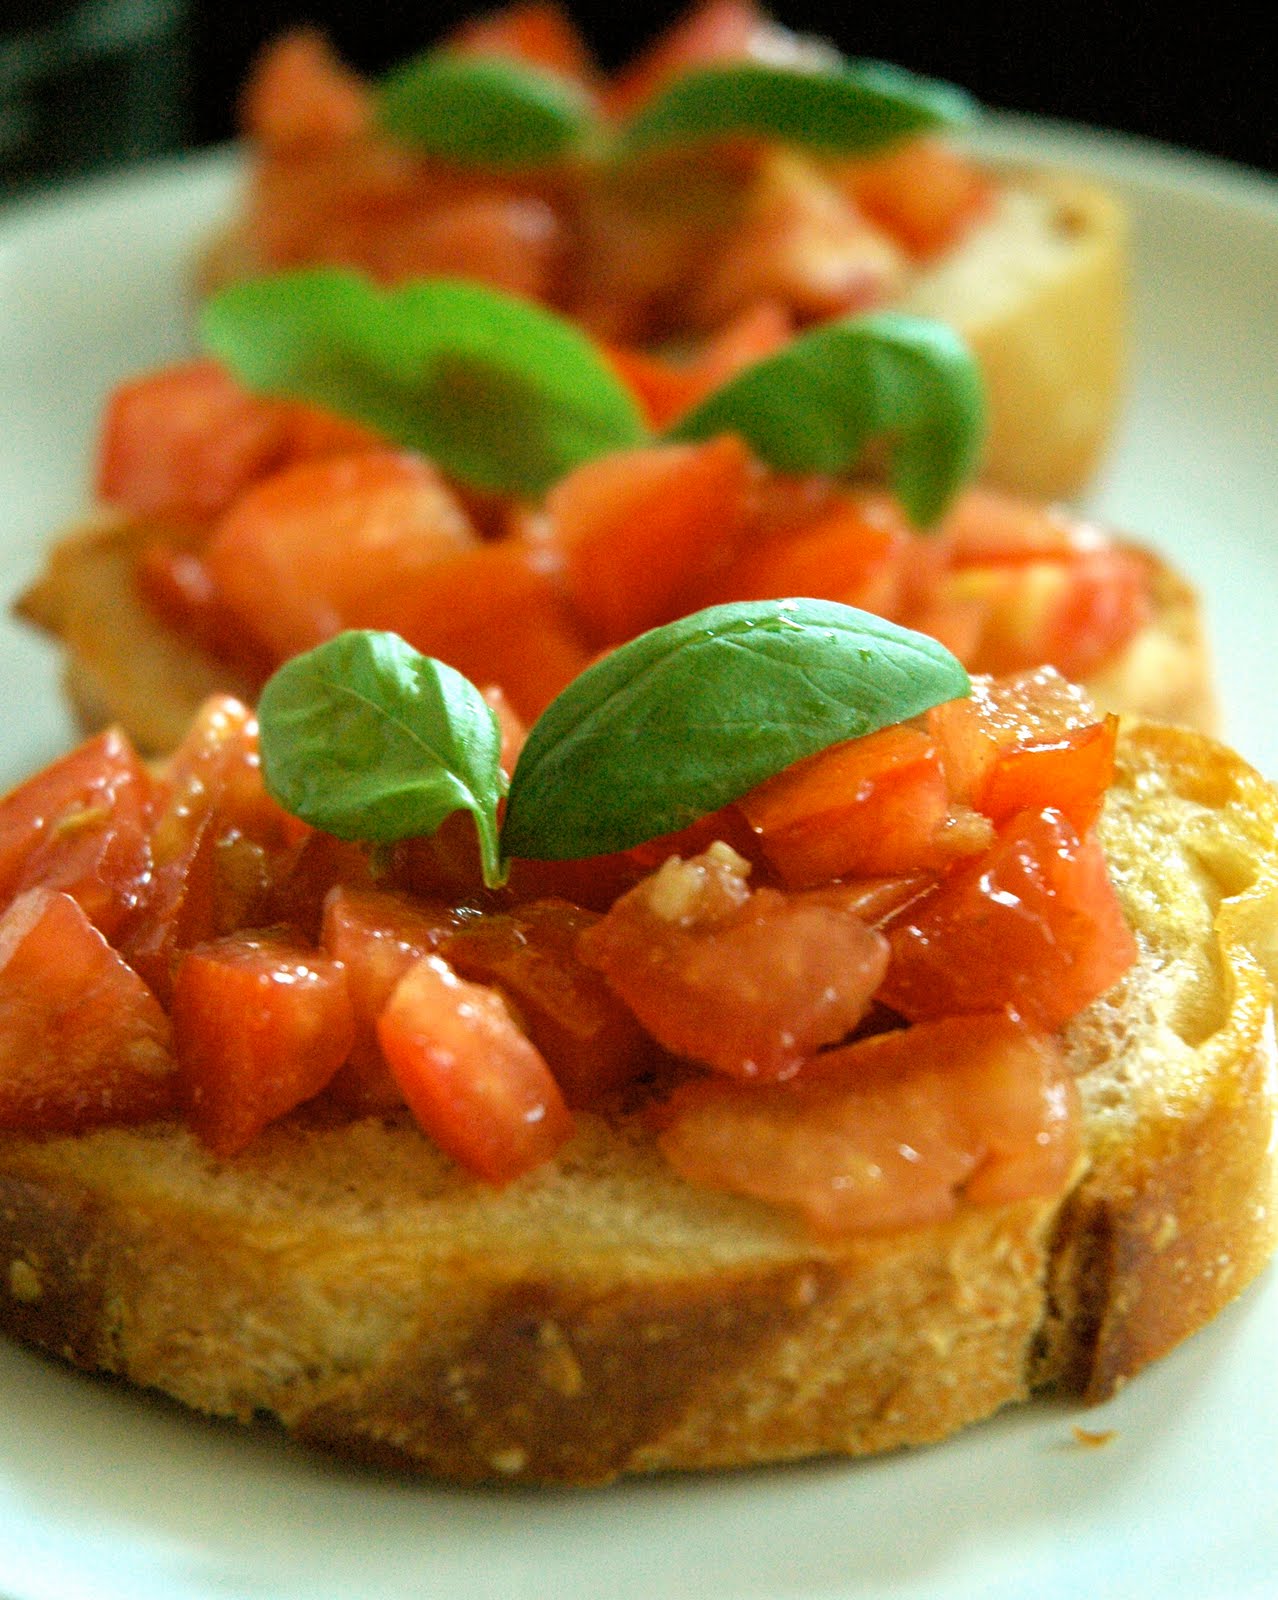 Olives &amp; Bread: Bruschetta with Tomato and Basil